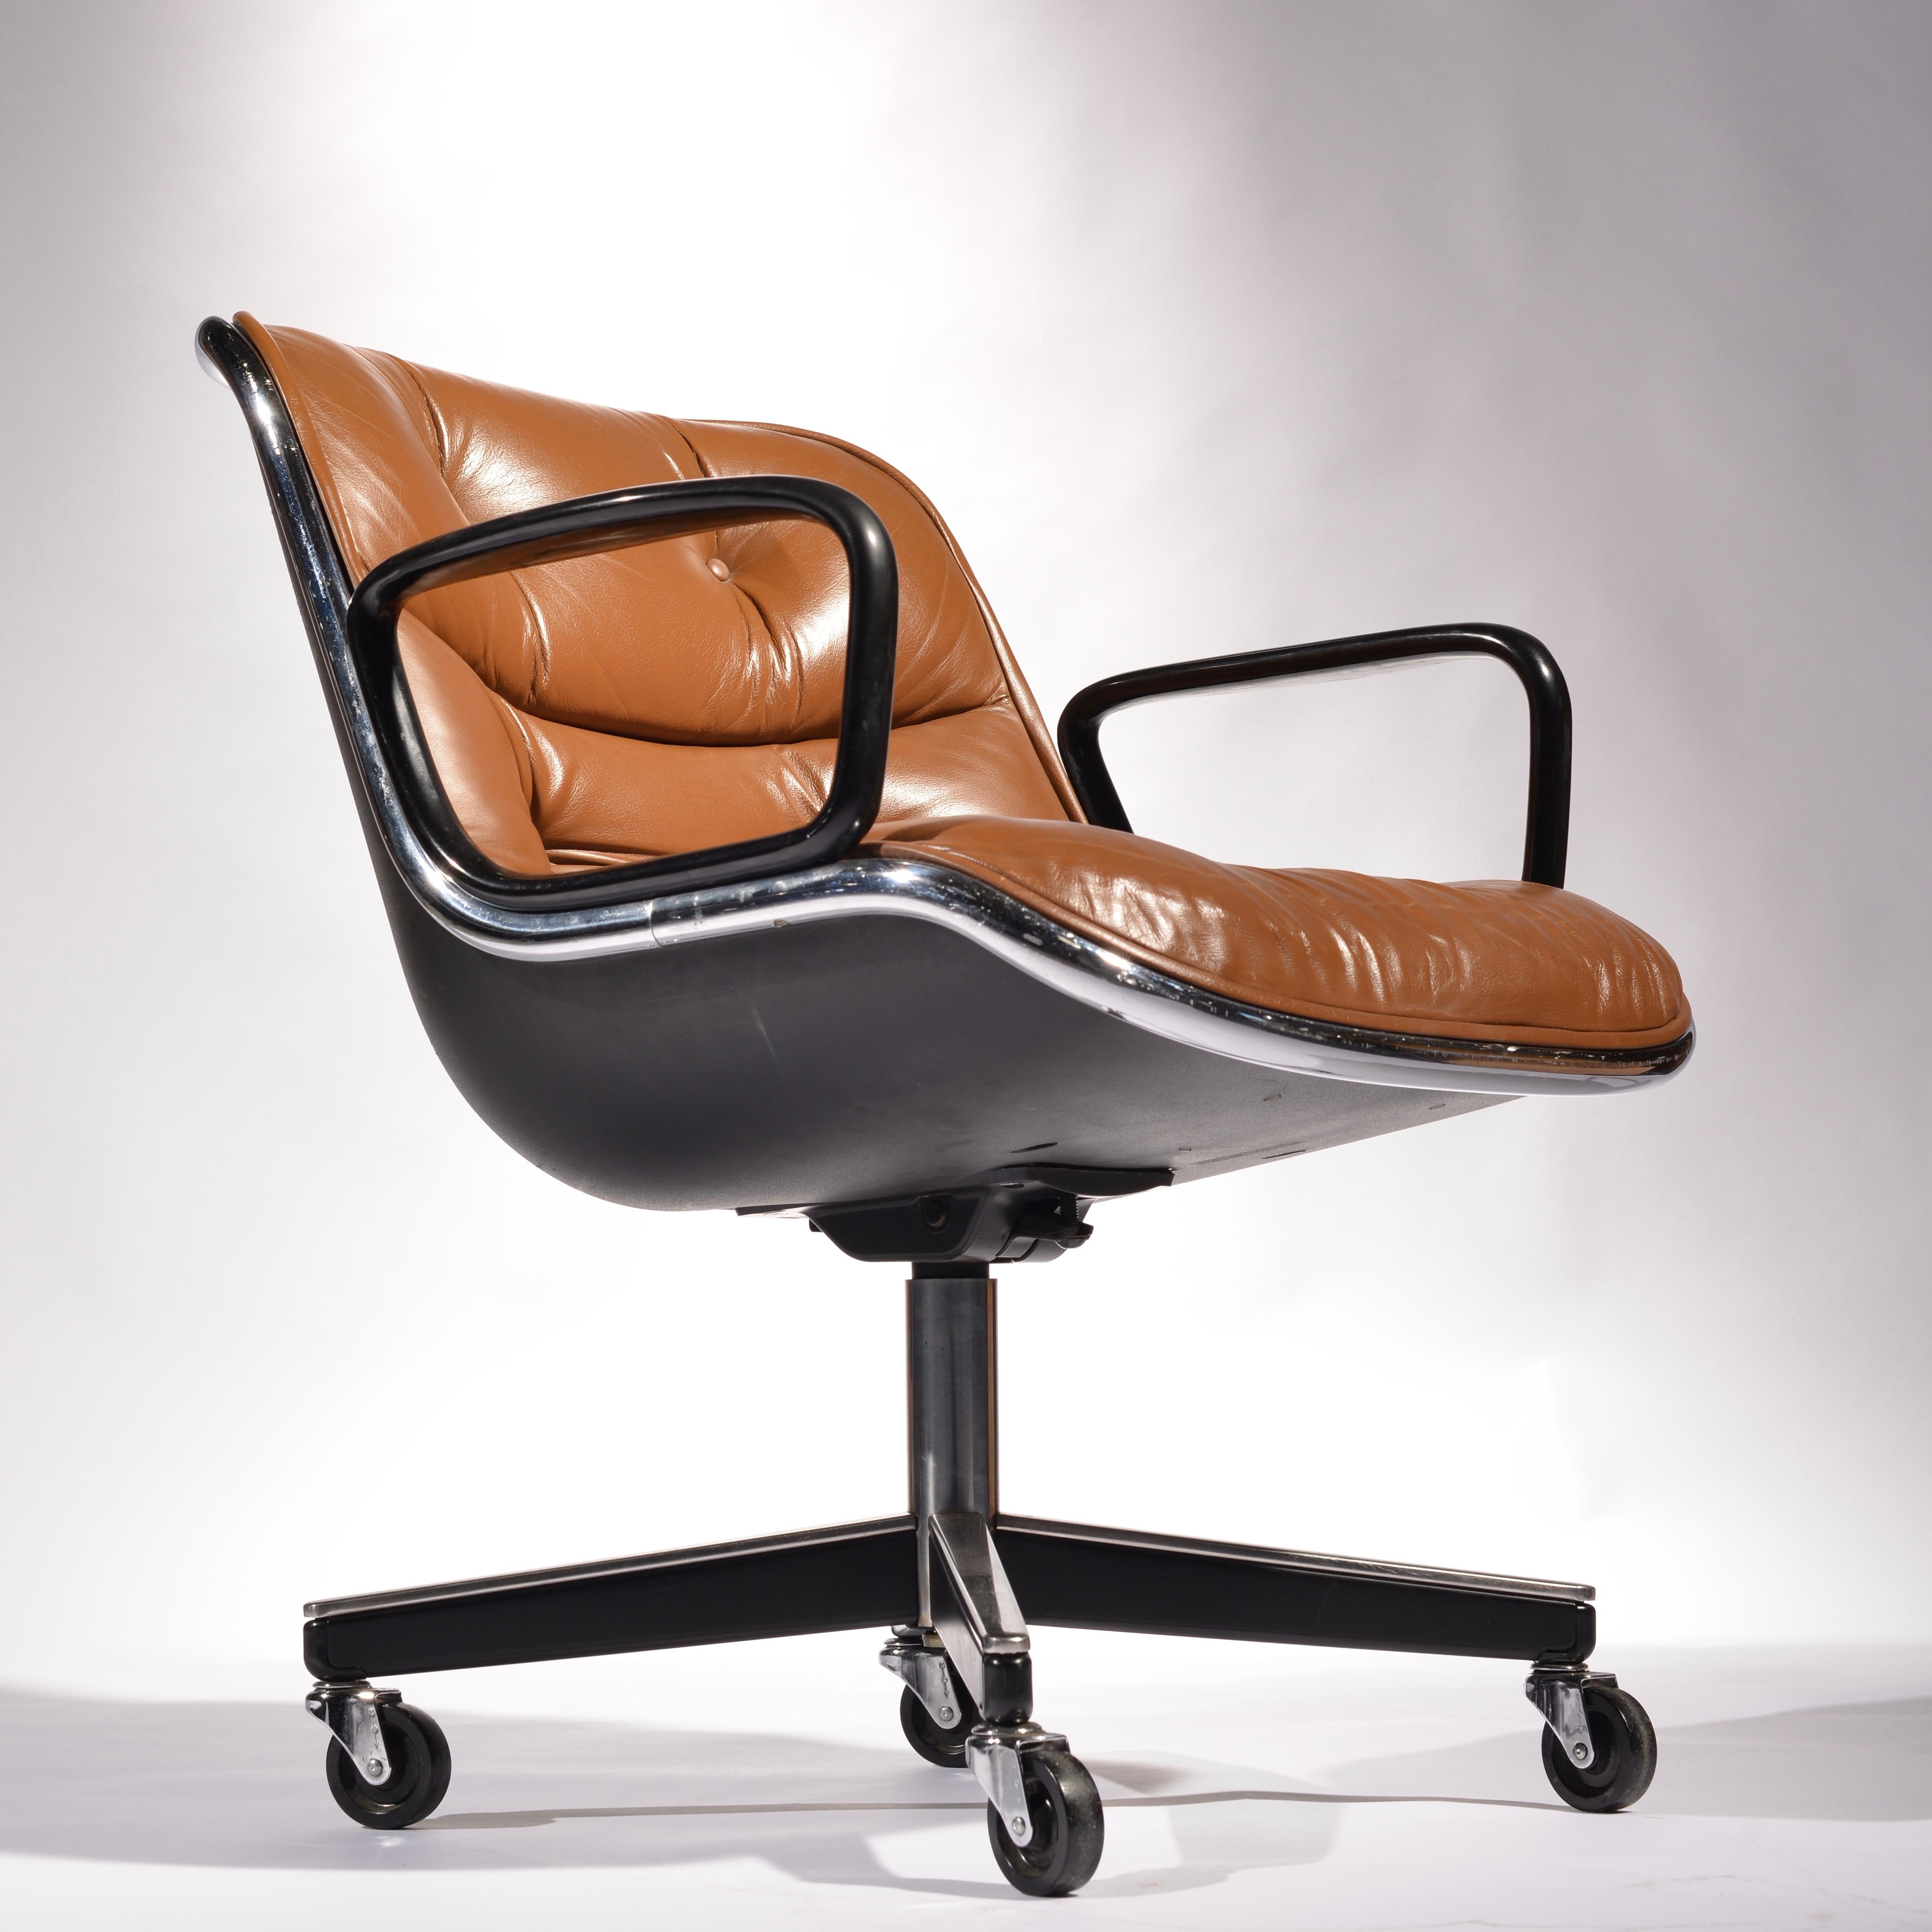 We have 35 vintage Charles Pollock executive desk chair for Knoll in the rare and amazing cognac leather. The ultimate ergonomic, office desk chair designed by this George Nelson apprentice, Charles Pollock. This set is in excellent condition!